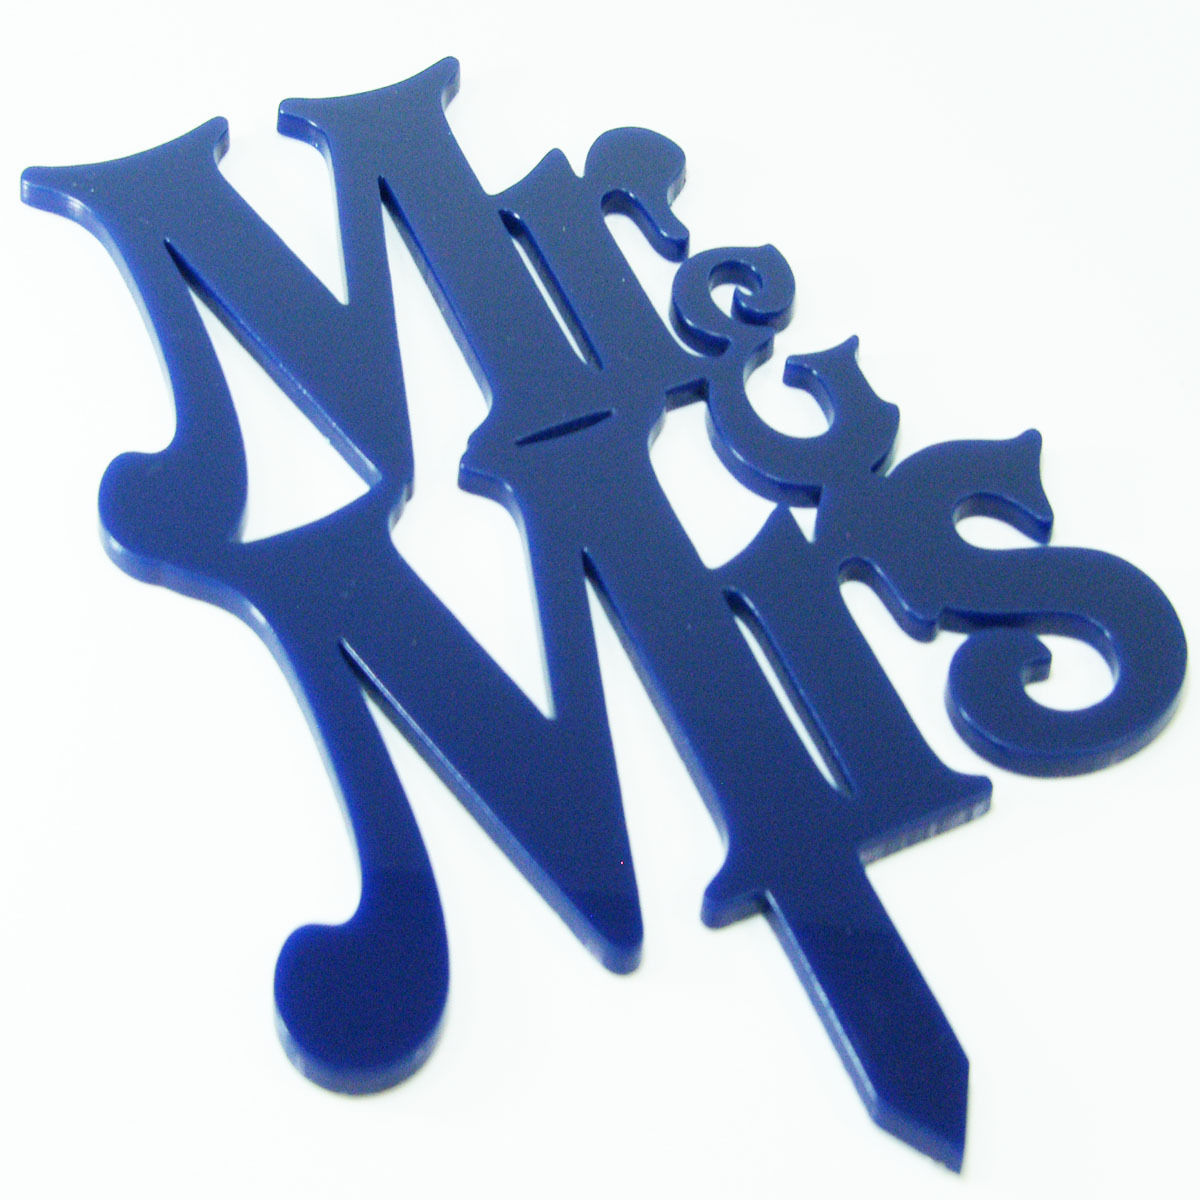 Mr and Mrs Curly Proposal Wedding Engagement Cake Decoration Topper Acrylic